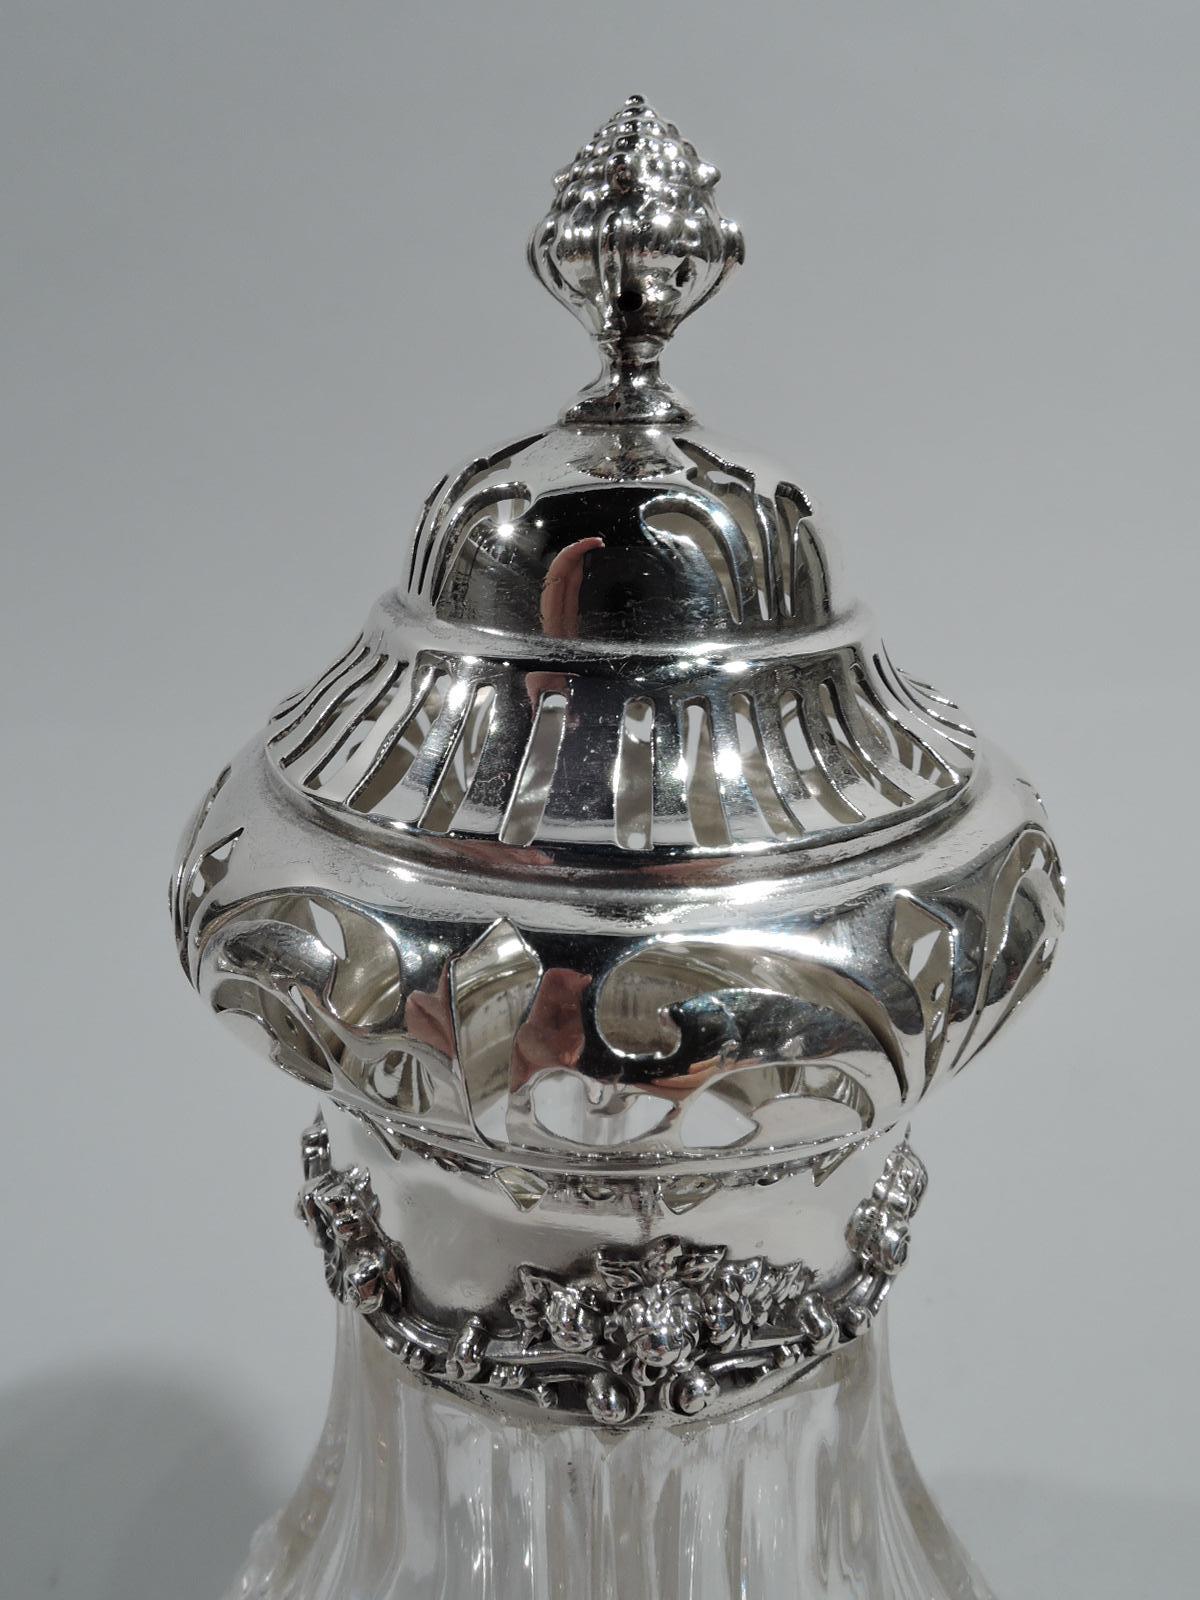 Turn-of-the-century American Edwardian Classical sterling silver and crystal sugar shaker. Each: Fluted glass baluster body with sterling silver mounts: plain collar and raised foot with flutes and scrolls. Cover double-domed and pierced with berry